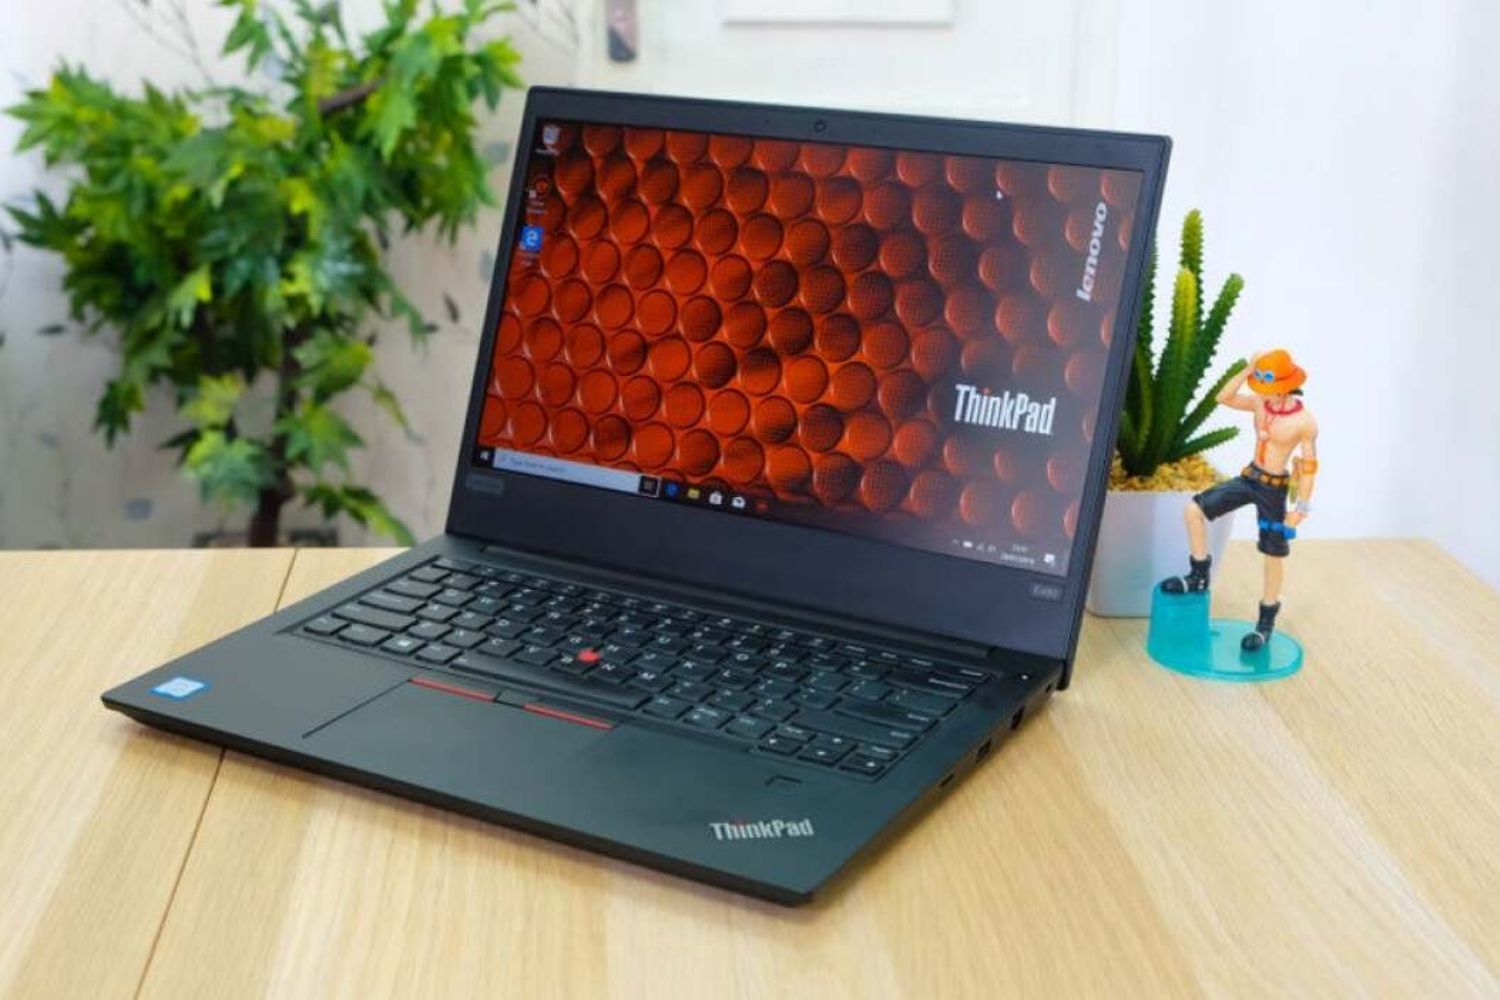 Thinkpad Ultrabook: How To Suspend